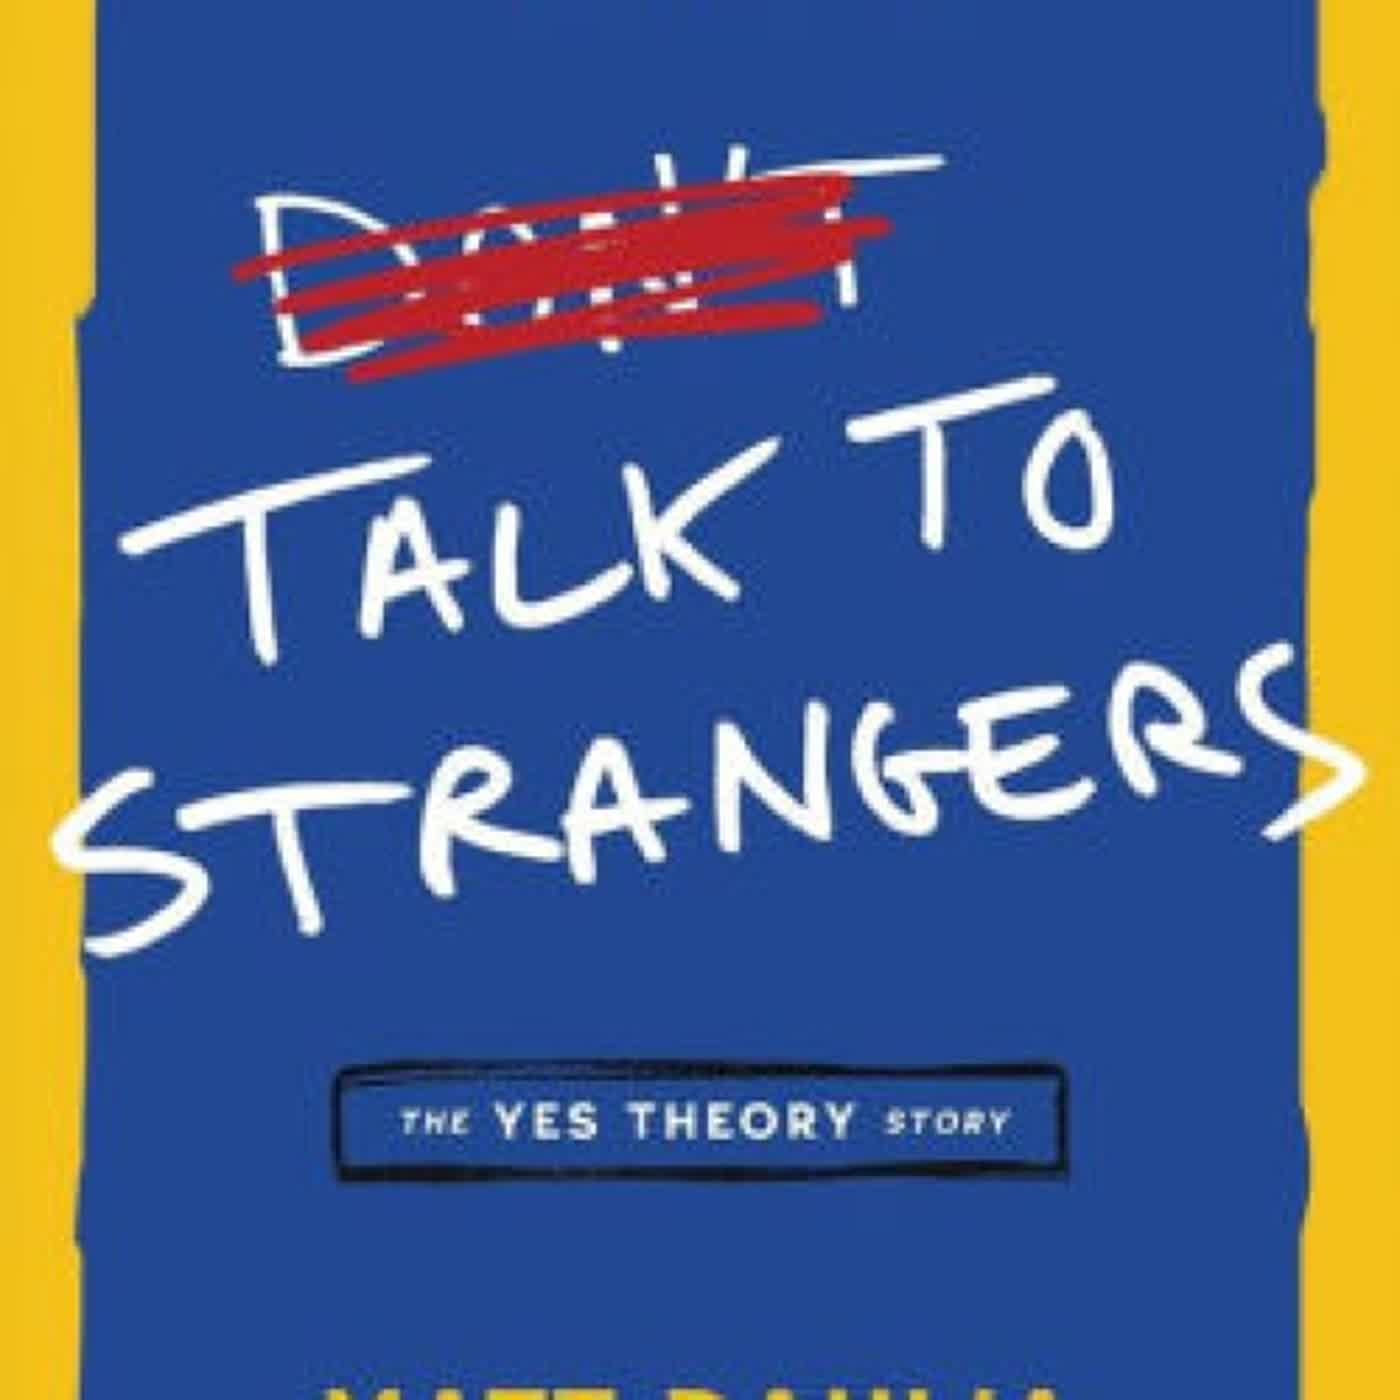 PDF [DOWNLOAD] Talk to Strangers: The Yes Theory Story by Matt Dahlia, Derin Emre on Iphone